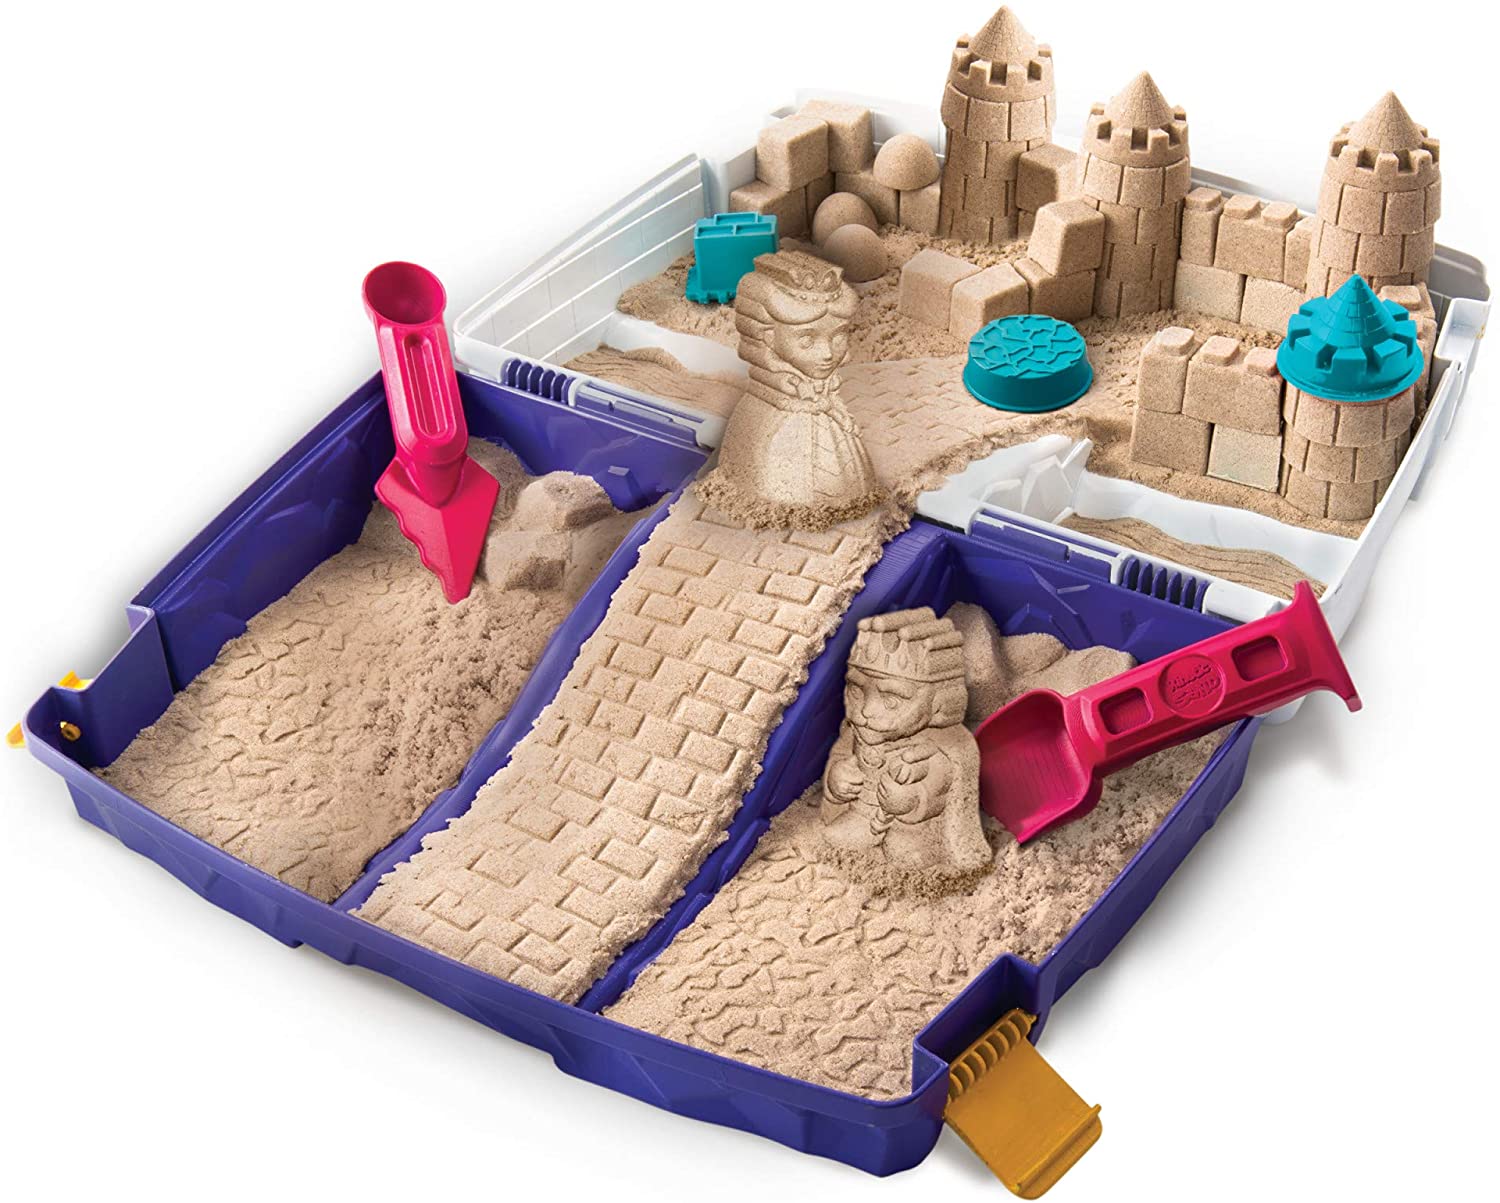 KINETIC SAND EGG CARTON - The Toy Insider